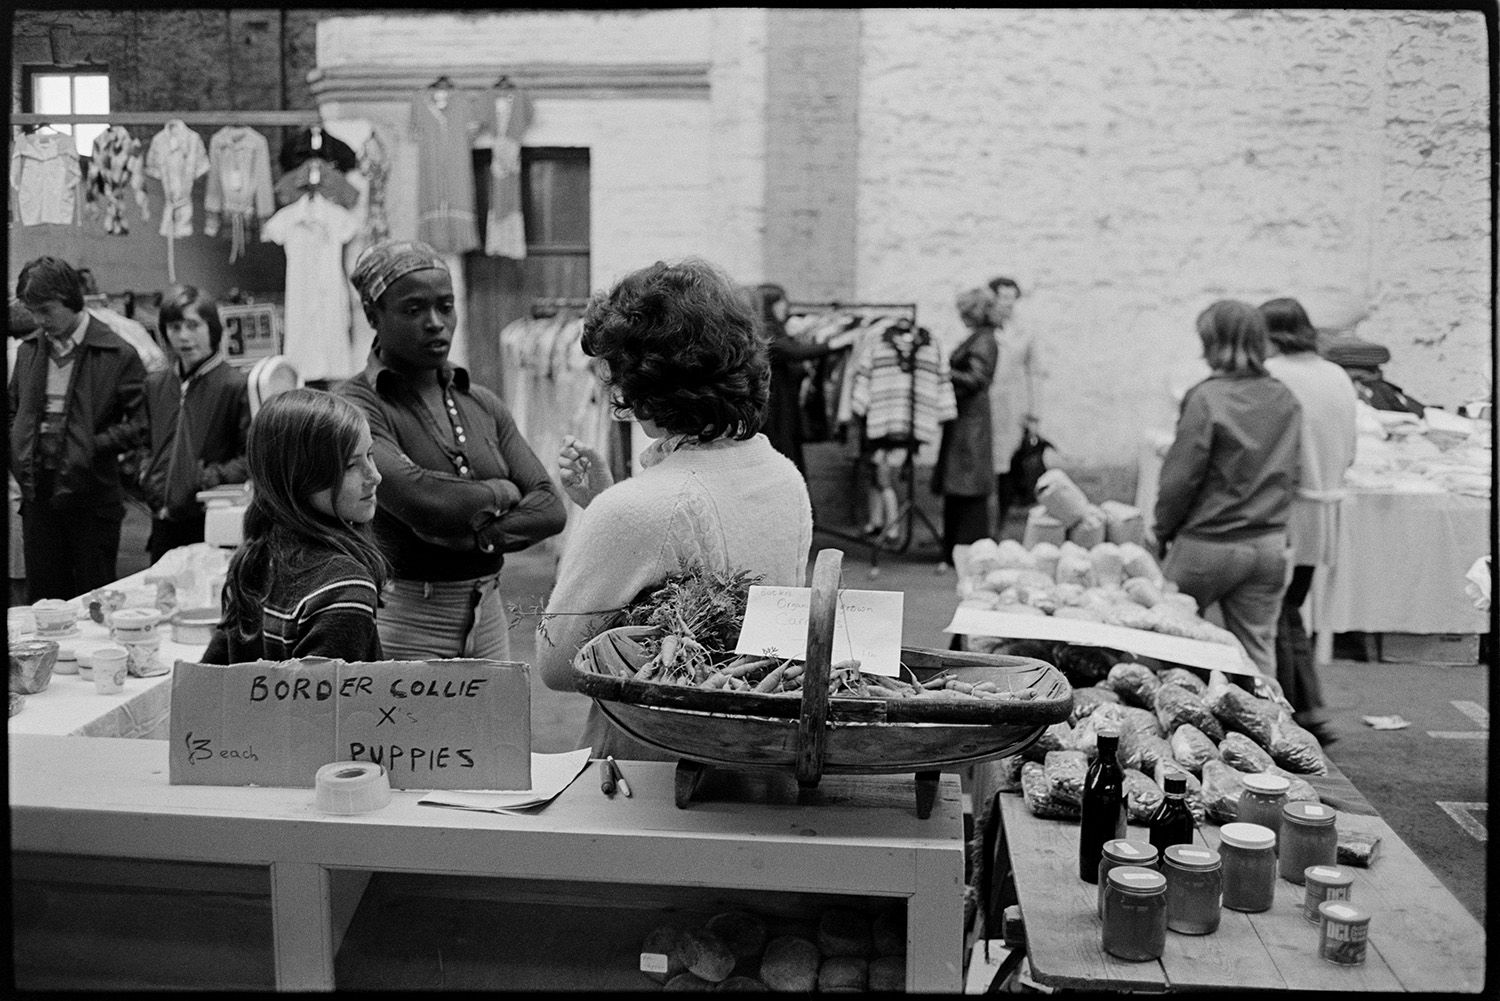 Market scenes. 
[Two women and a girl talking behind a market stall at South Molton Market. Jars, packets of food and a trug with carrots can be seen on the stall. There is also a sign advertising Border Collie cross puppies. Customers and other market stalls, including a clothes stall, can be seen in the background.]